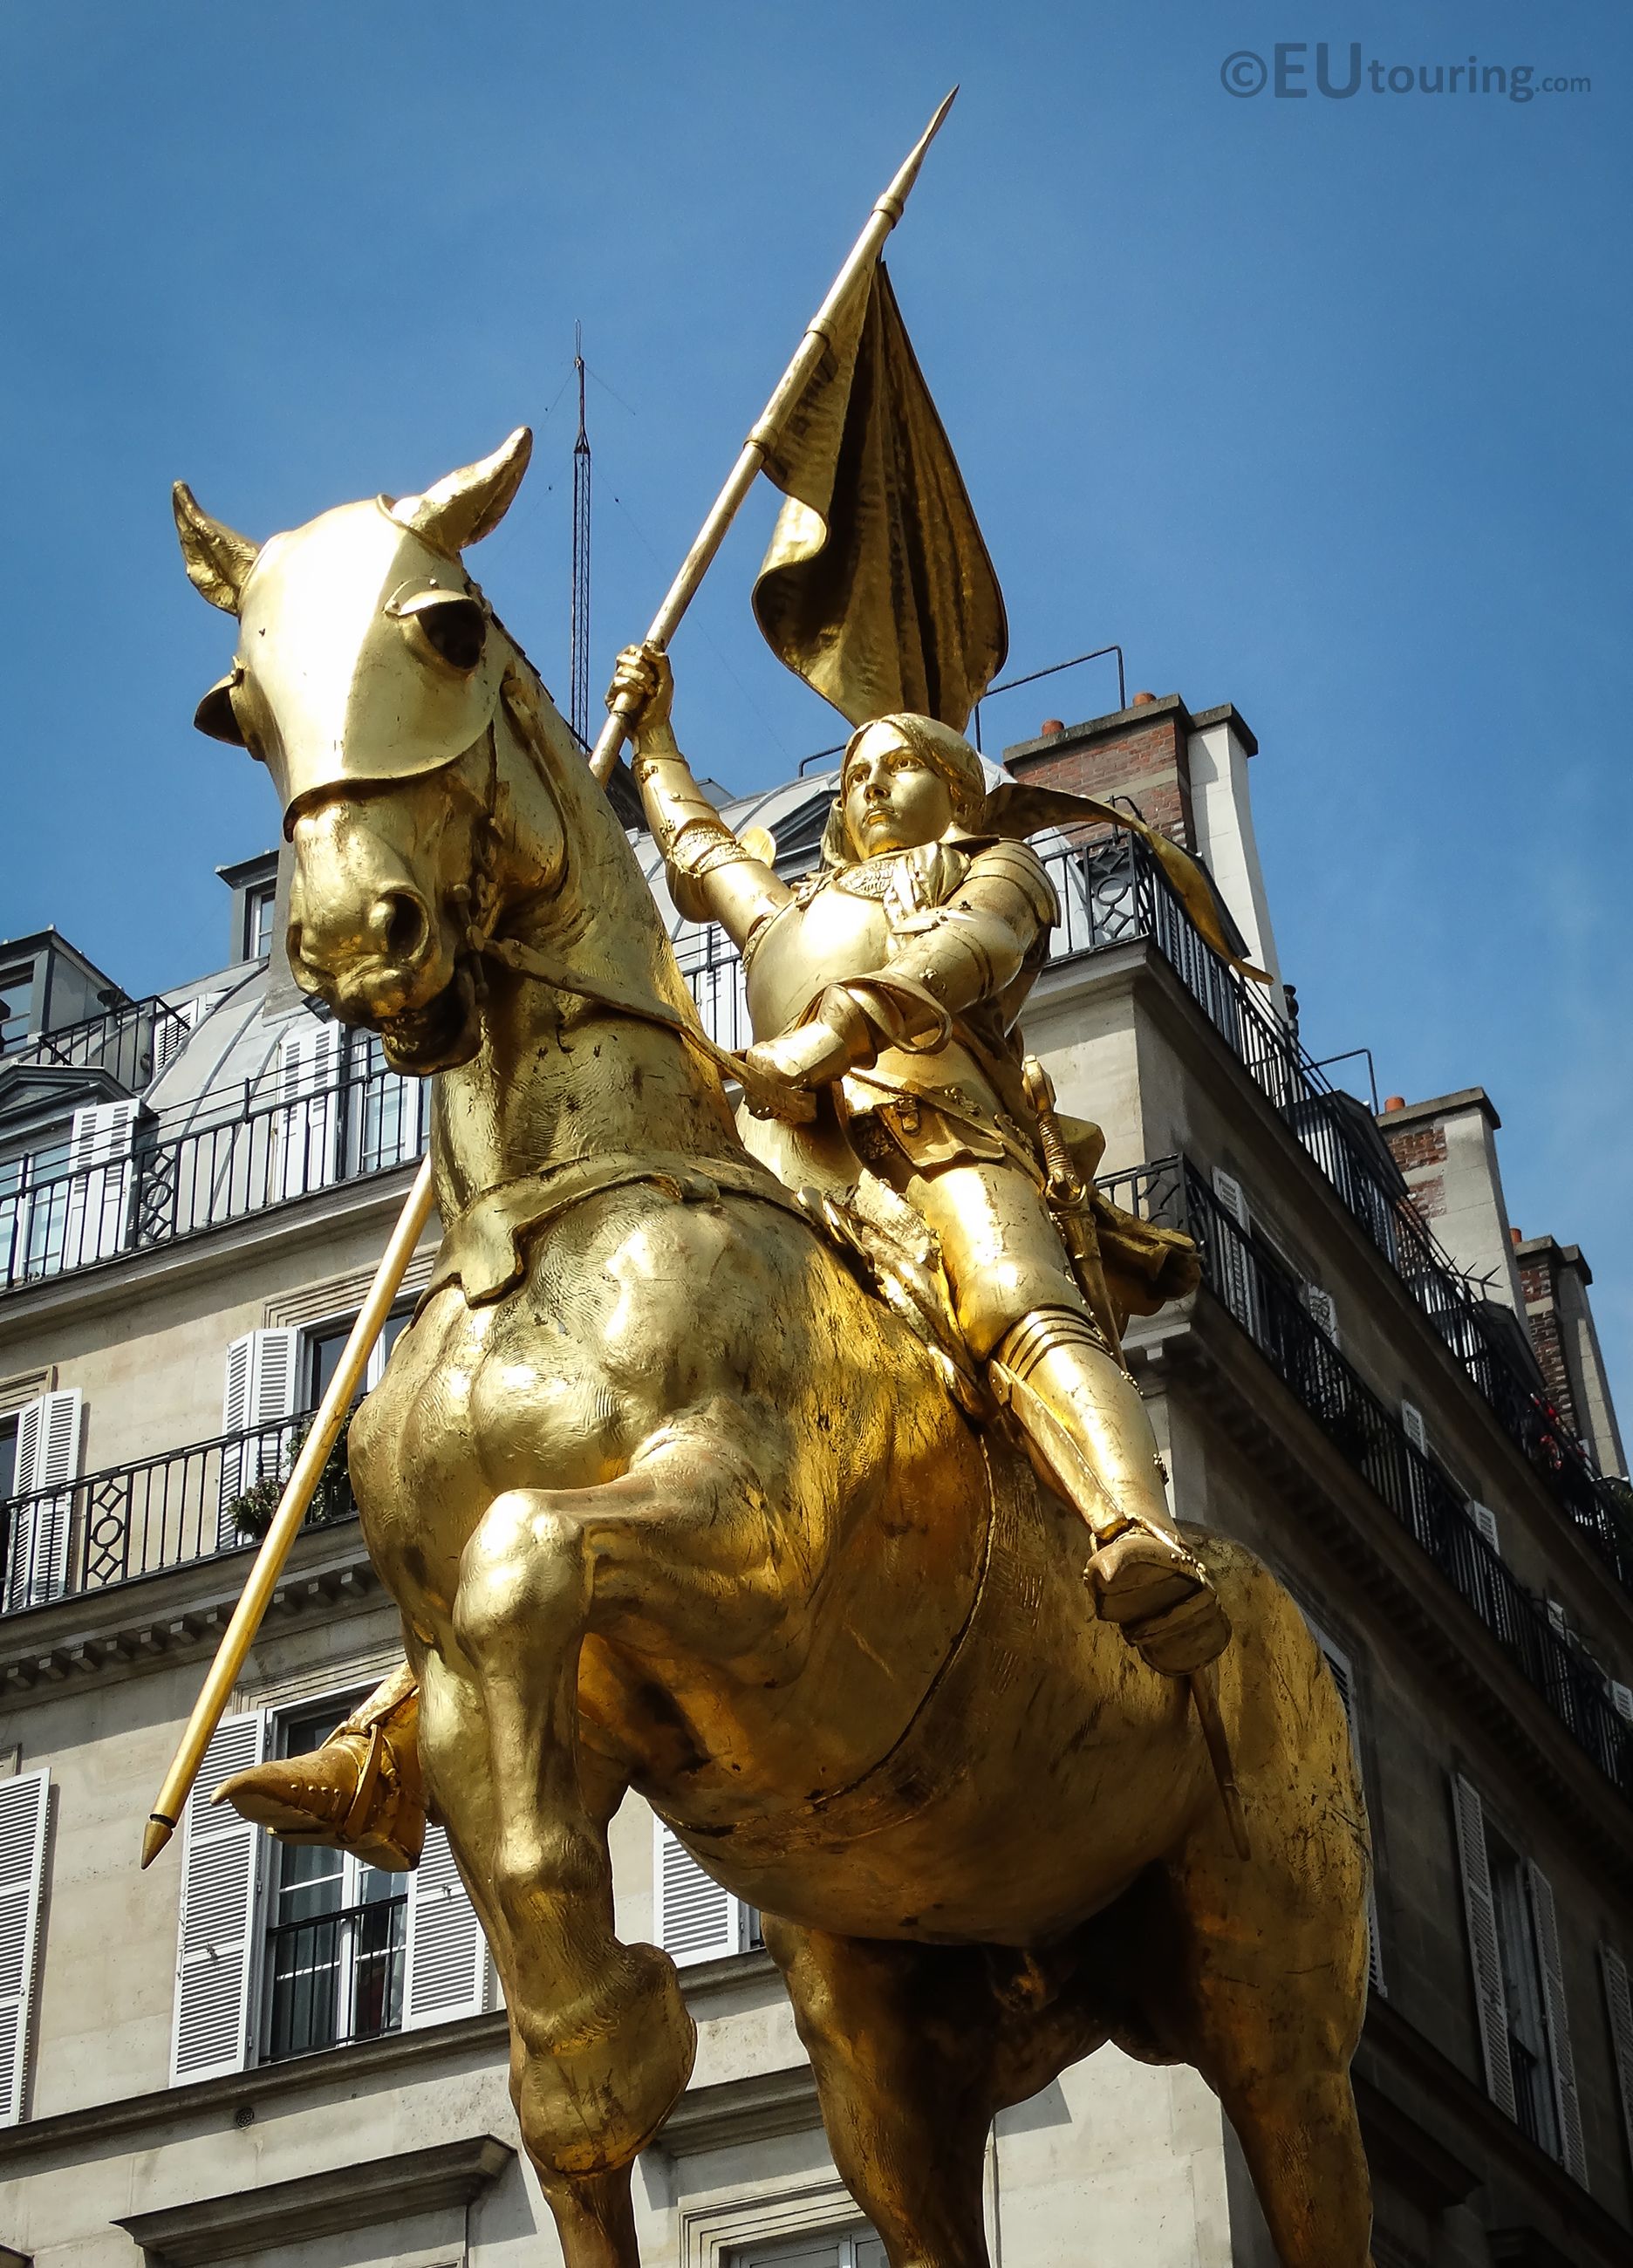 A close up view of the golden Joan of Arc statue found within Paris ...